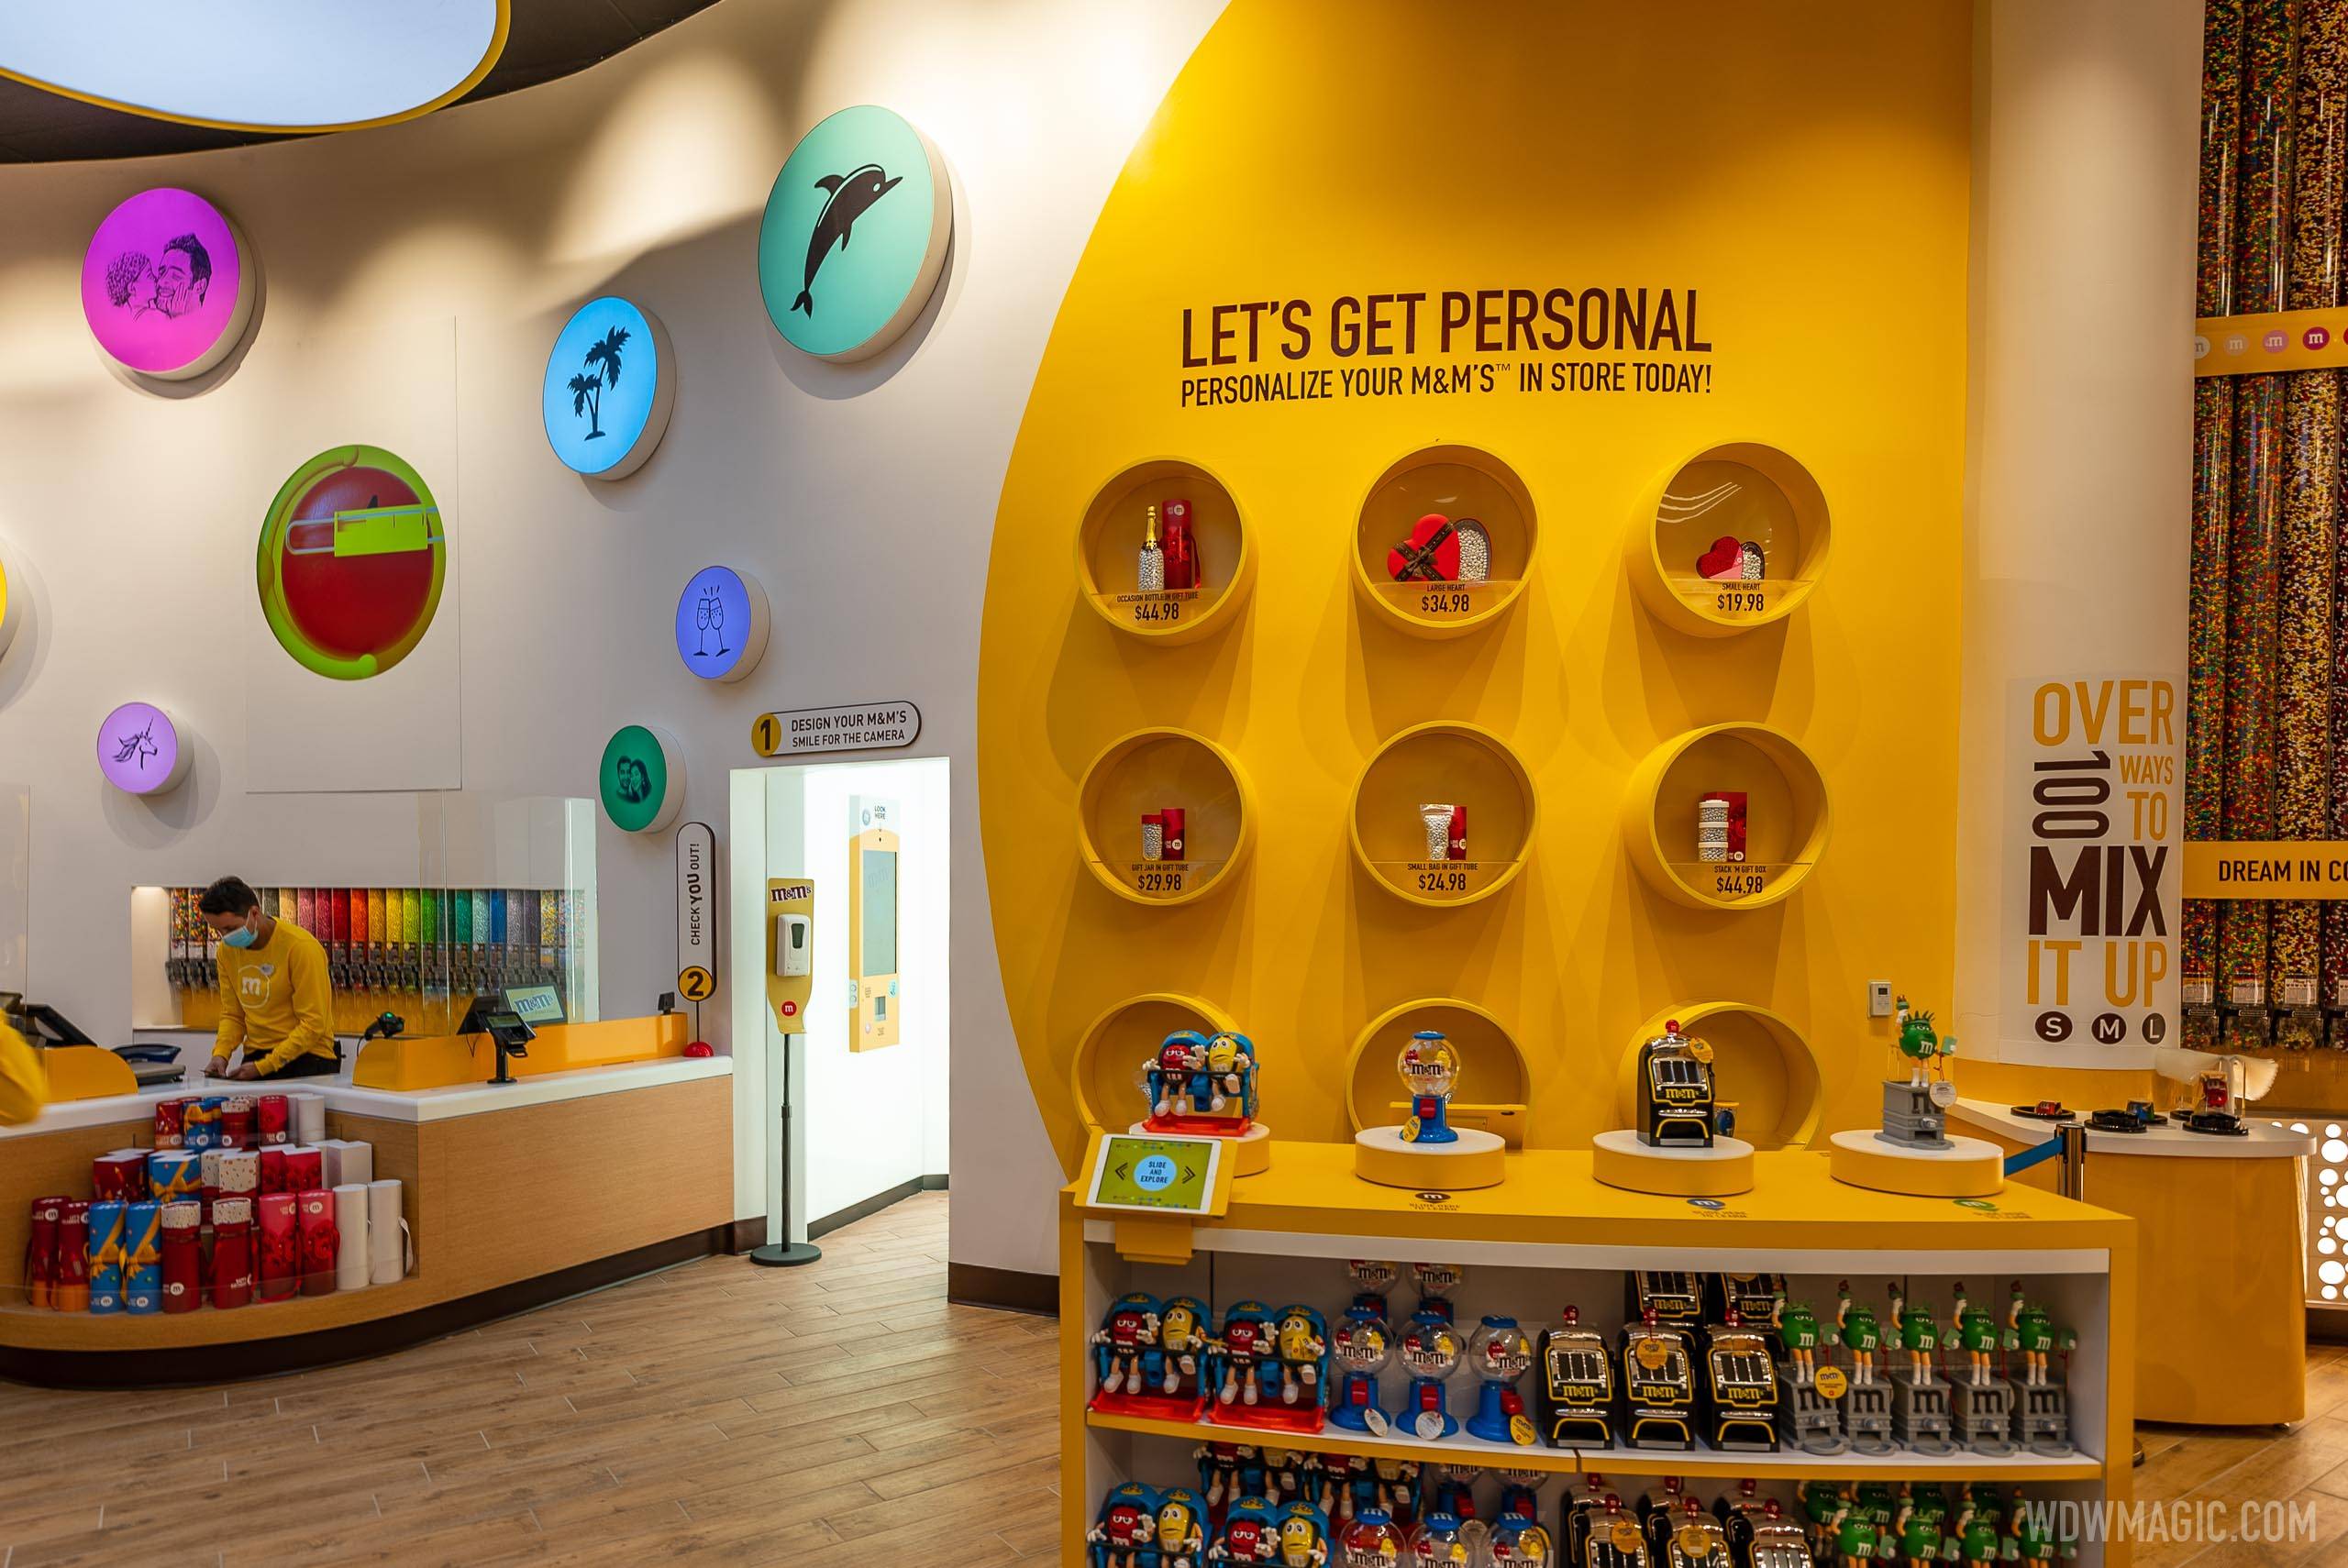 PHOTOS & VIDEOS! First Look Inside The NEW M&M's Store at Disney